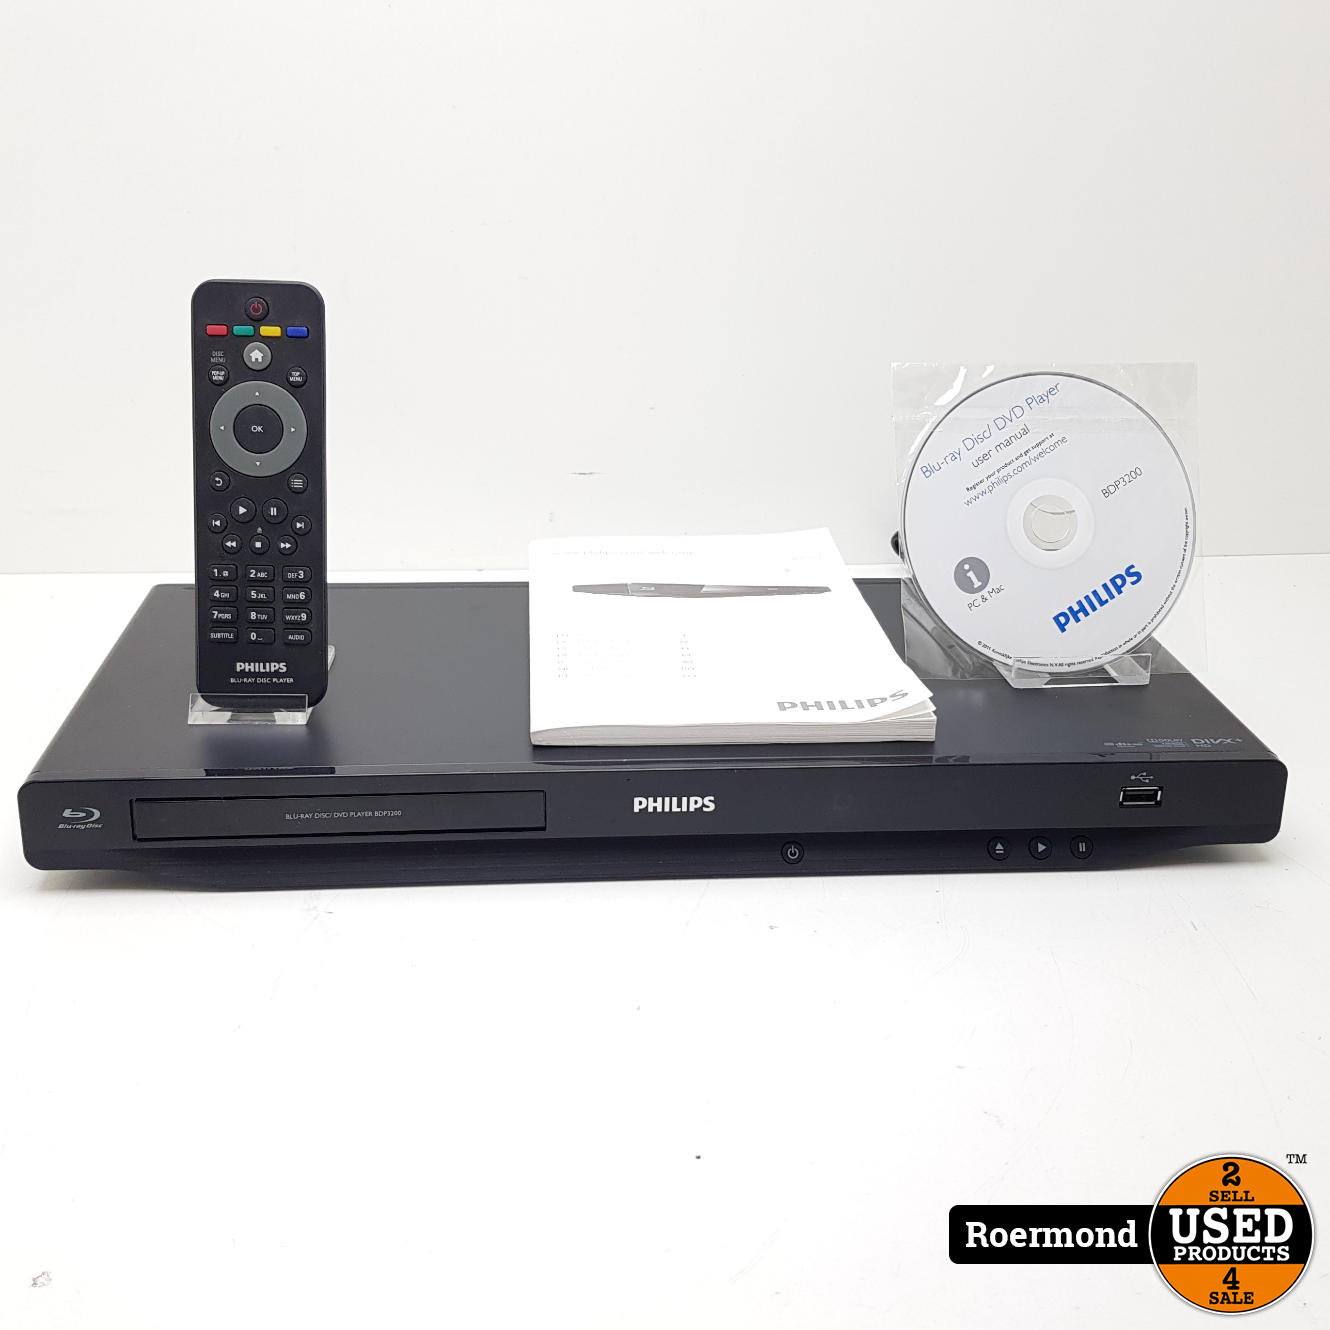 krans Ontrouw Precies philips Philips Blu-Ray Disc/DVD Player I Refurbished - Used Products  Roermond